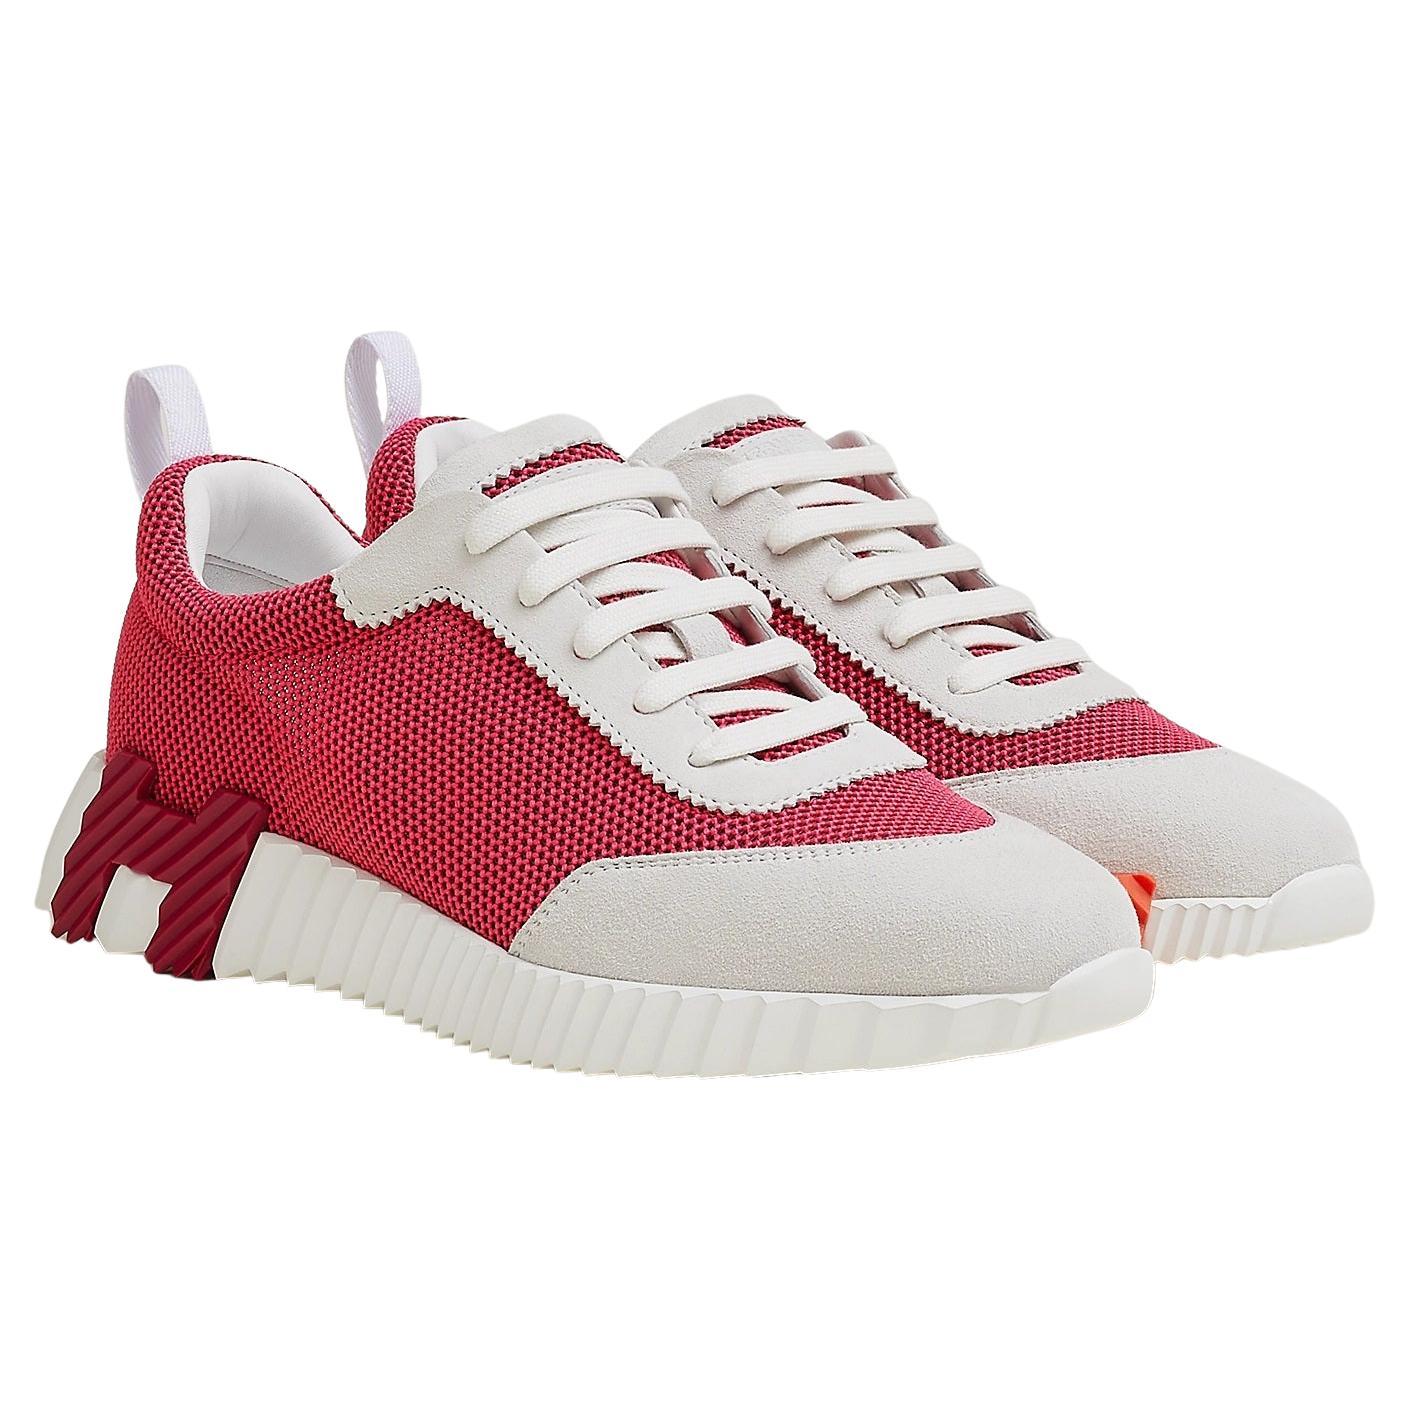 Hermes Bouncing Sneakers Color Vinicunca Pink / White Size 39 